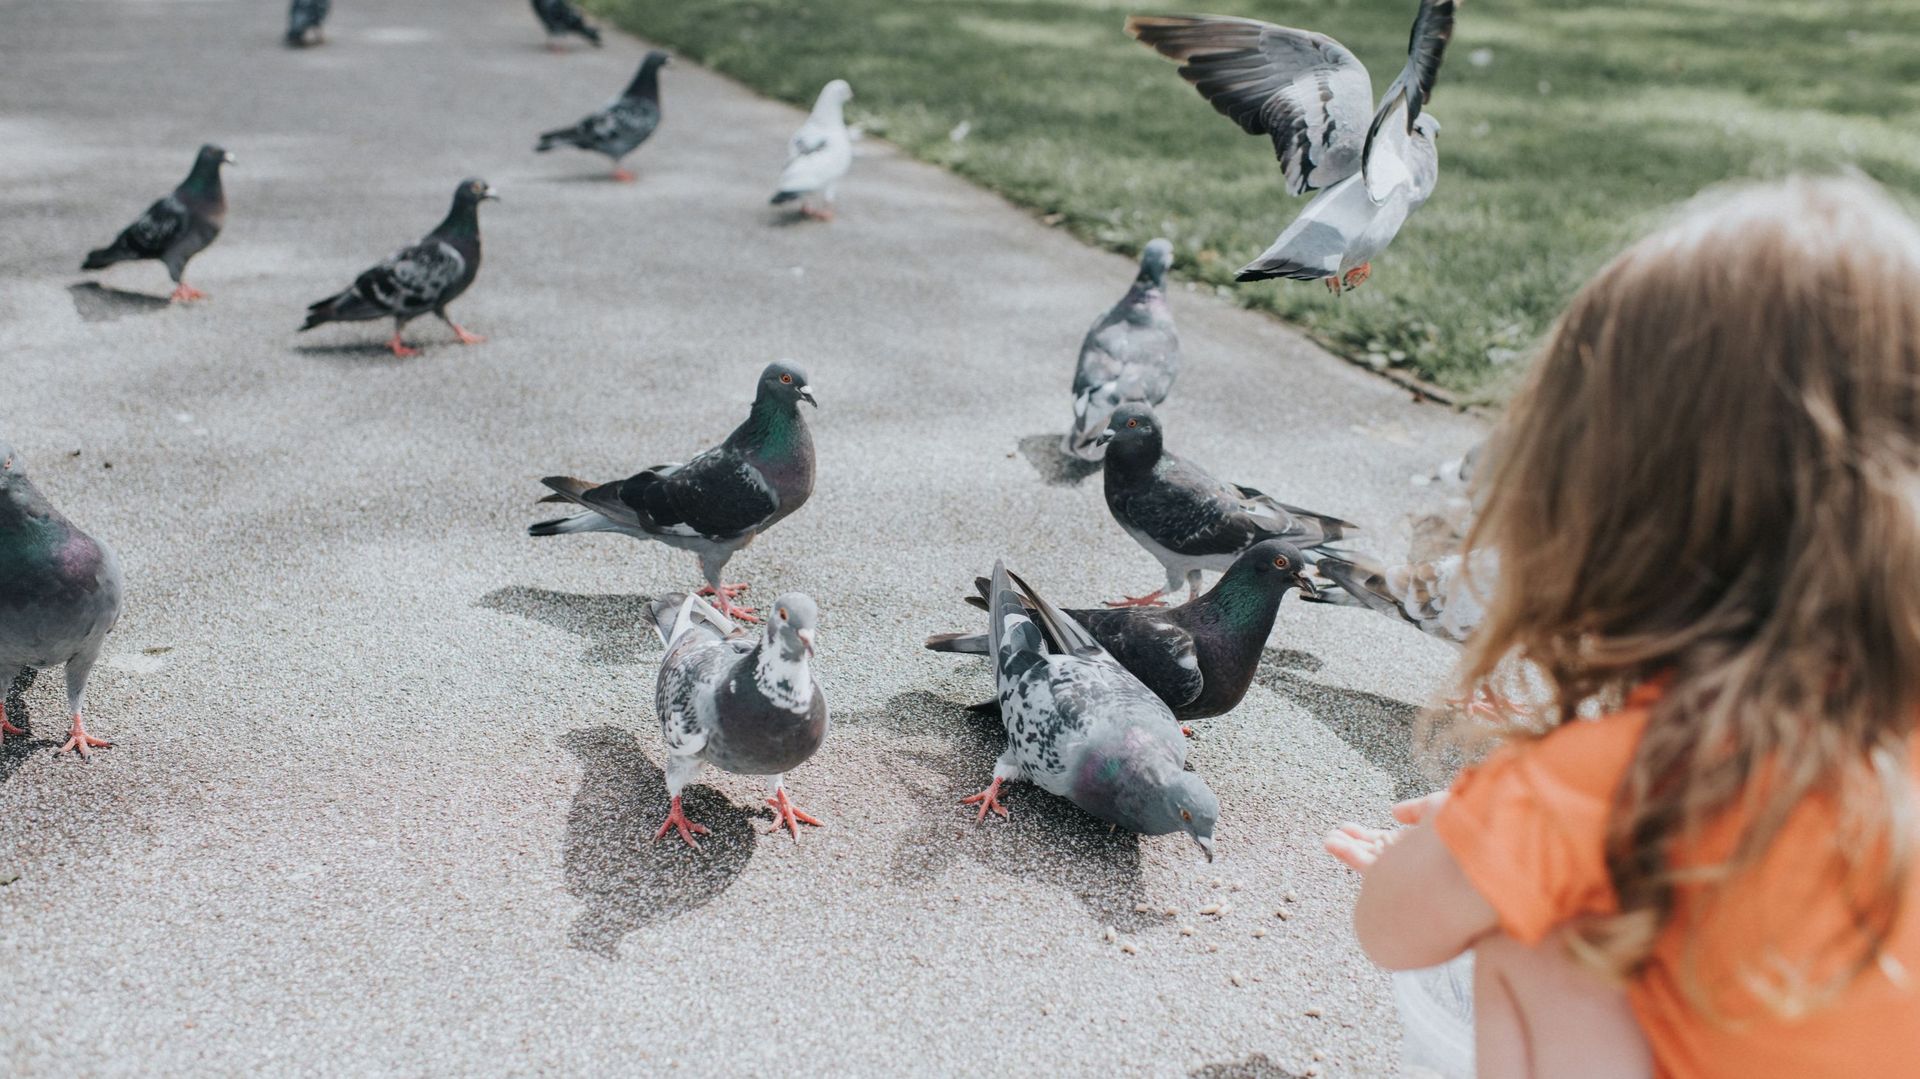 Child on a Path, hand-feeding Tame Pigeons